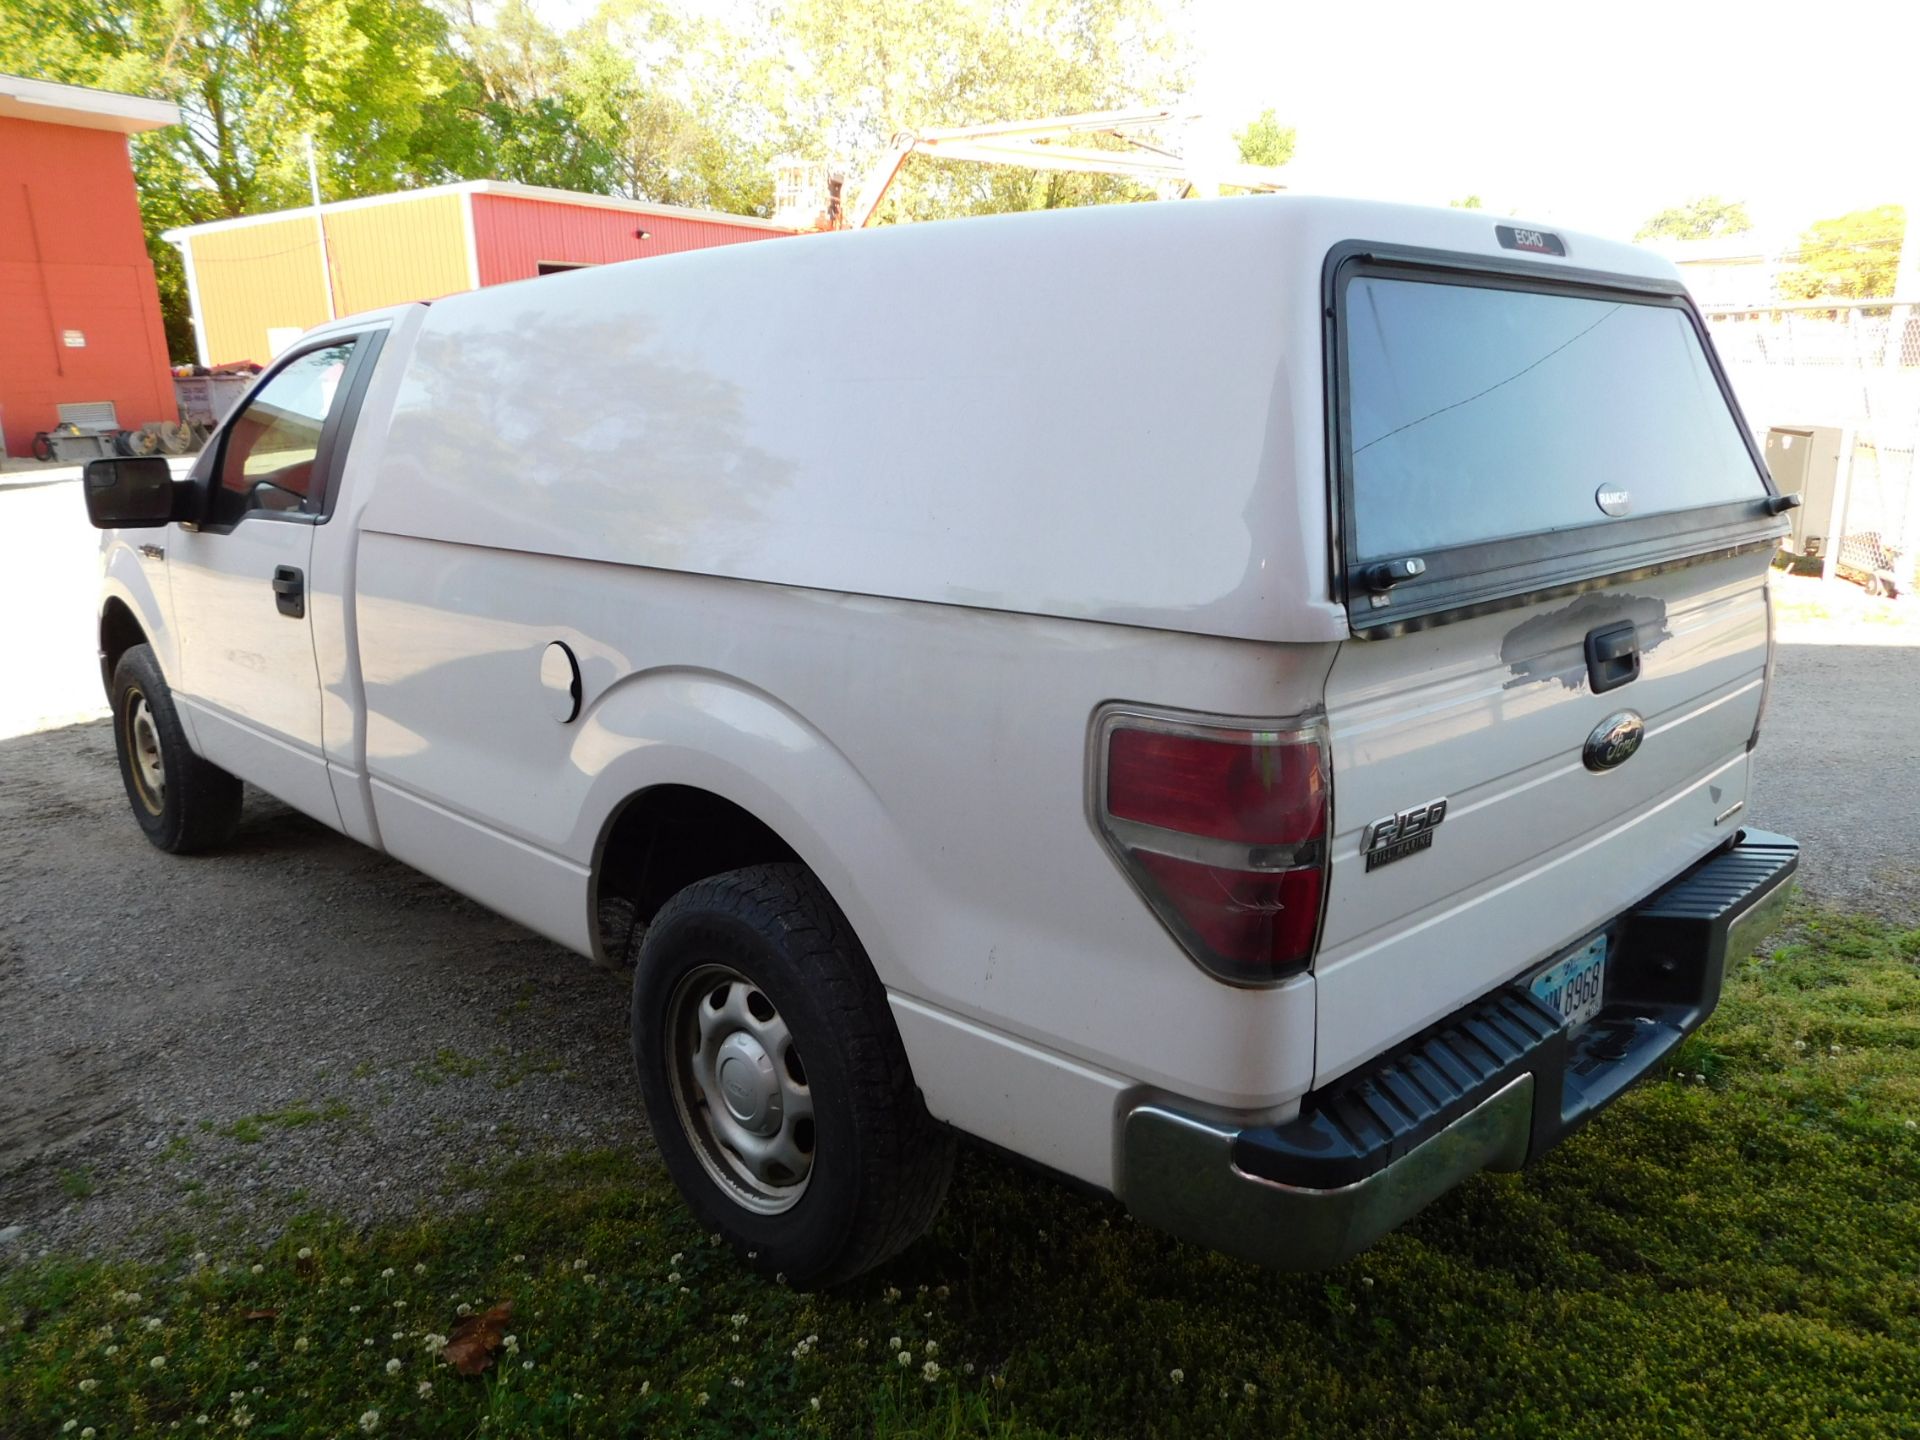 2011 Ford Pick up F-150XL vin 1FTMF1CM3CKD12942, Automatic Transmission, PW, Pl, 8'Bed w/Cap 146,289 - Image 8 of 46